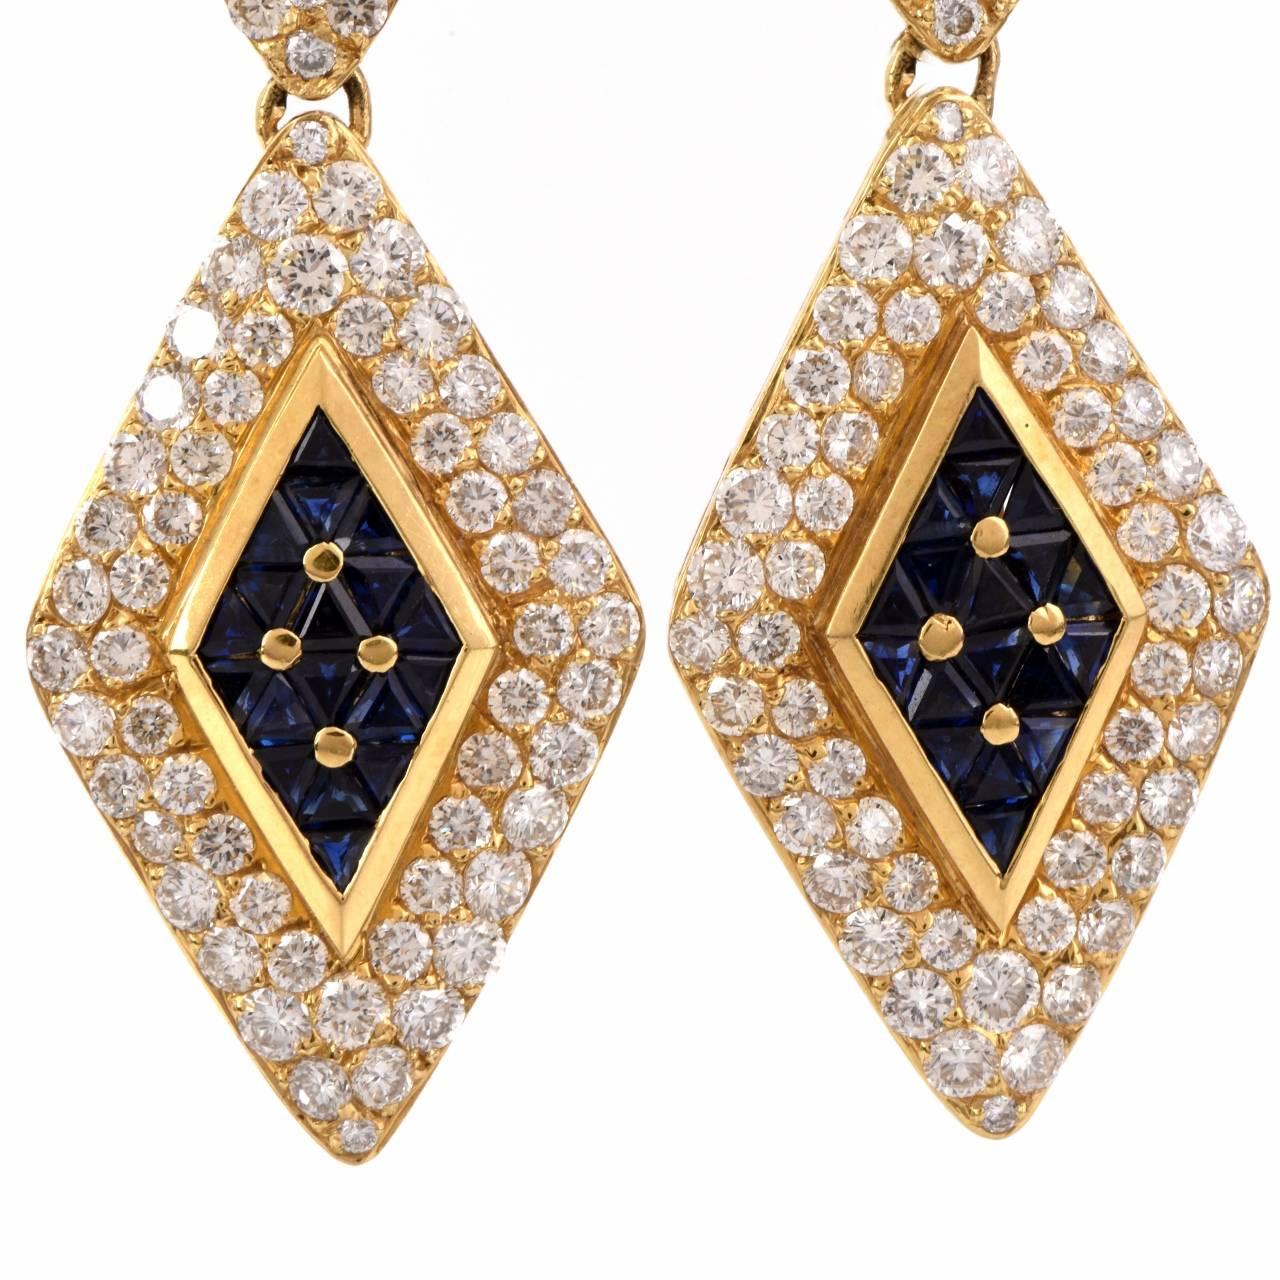 These vintage earrings in Art Deco design are crafted in solid 18K yellow gold, weigh 26.00 grams and measure 2.2